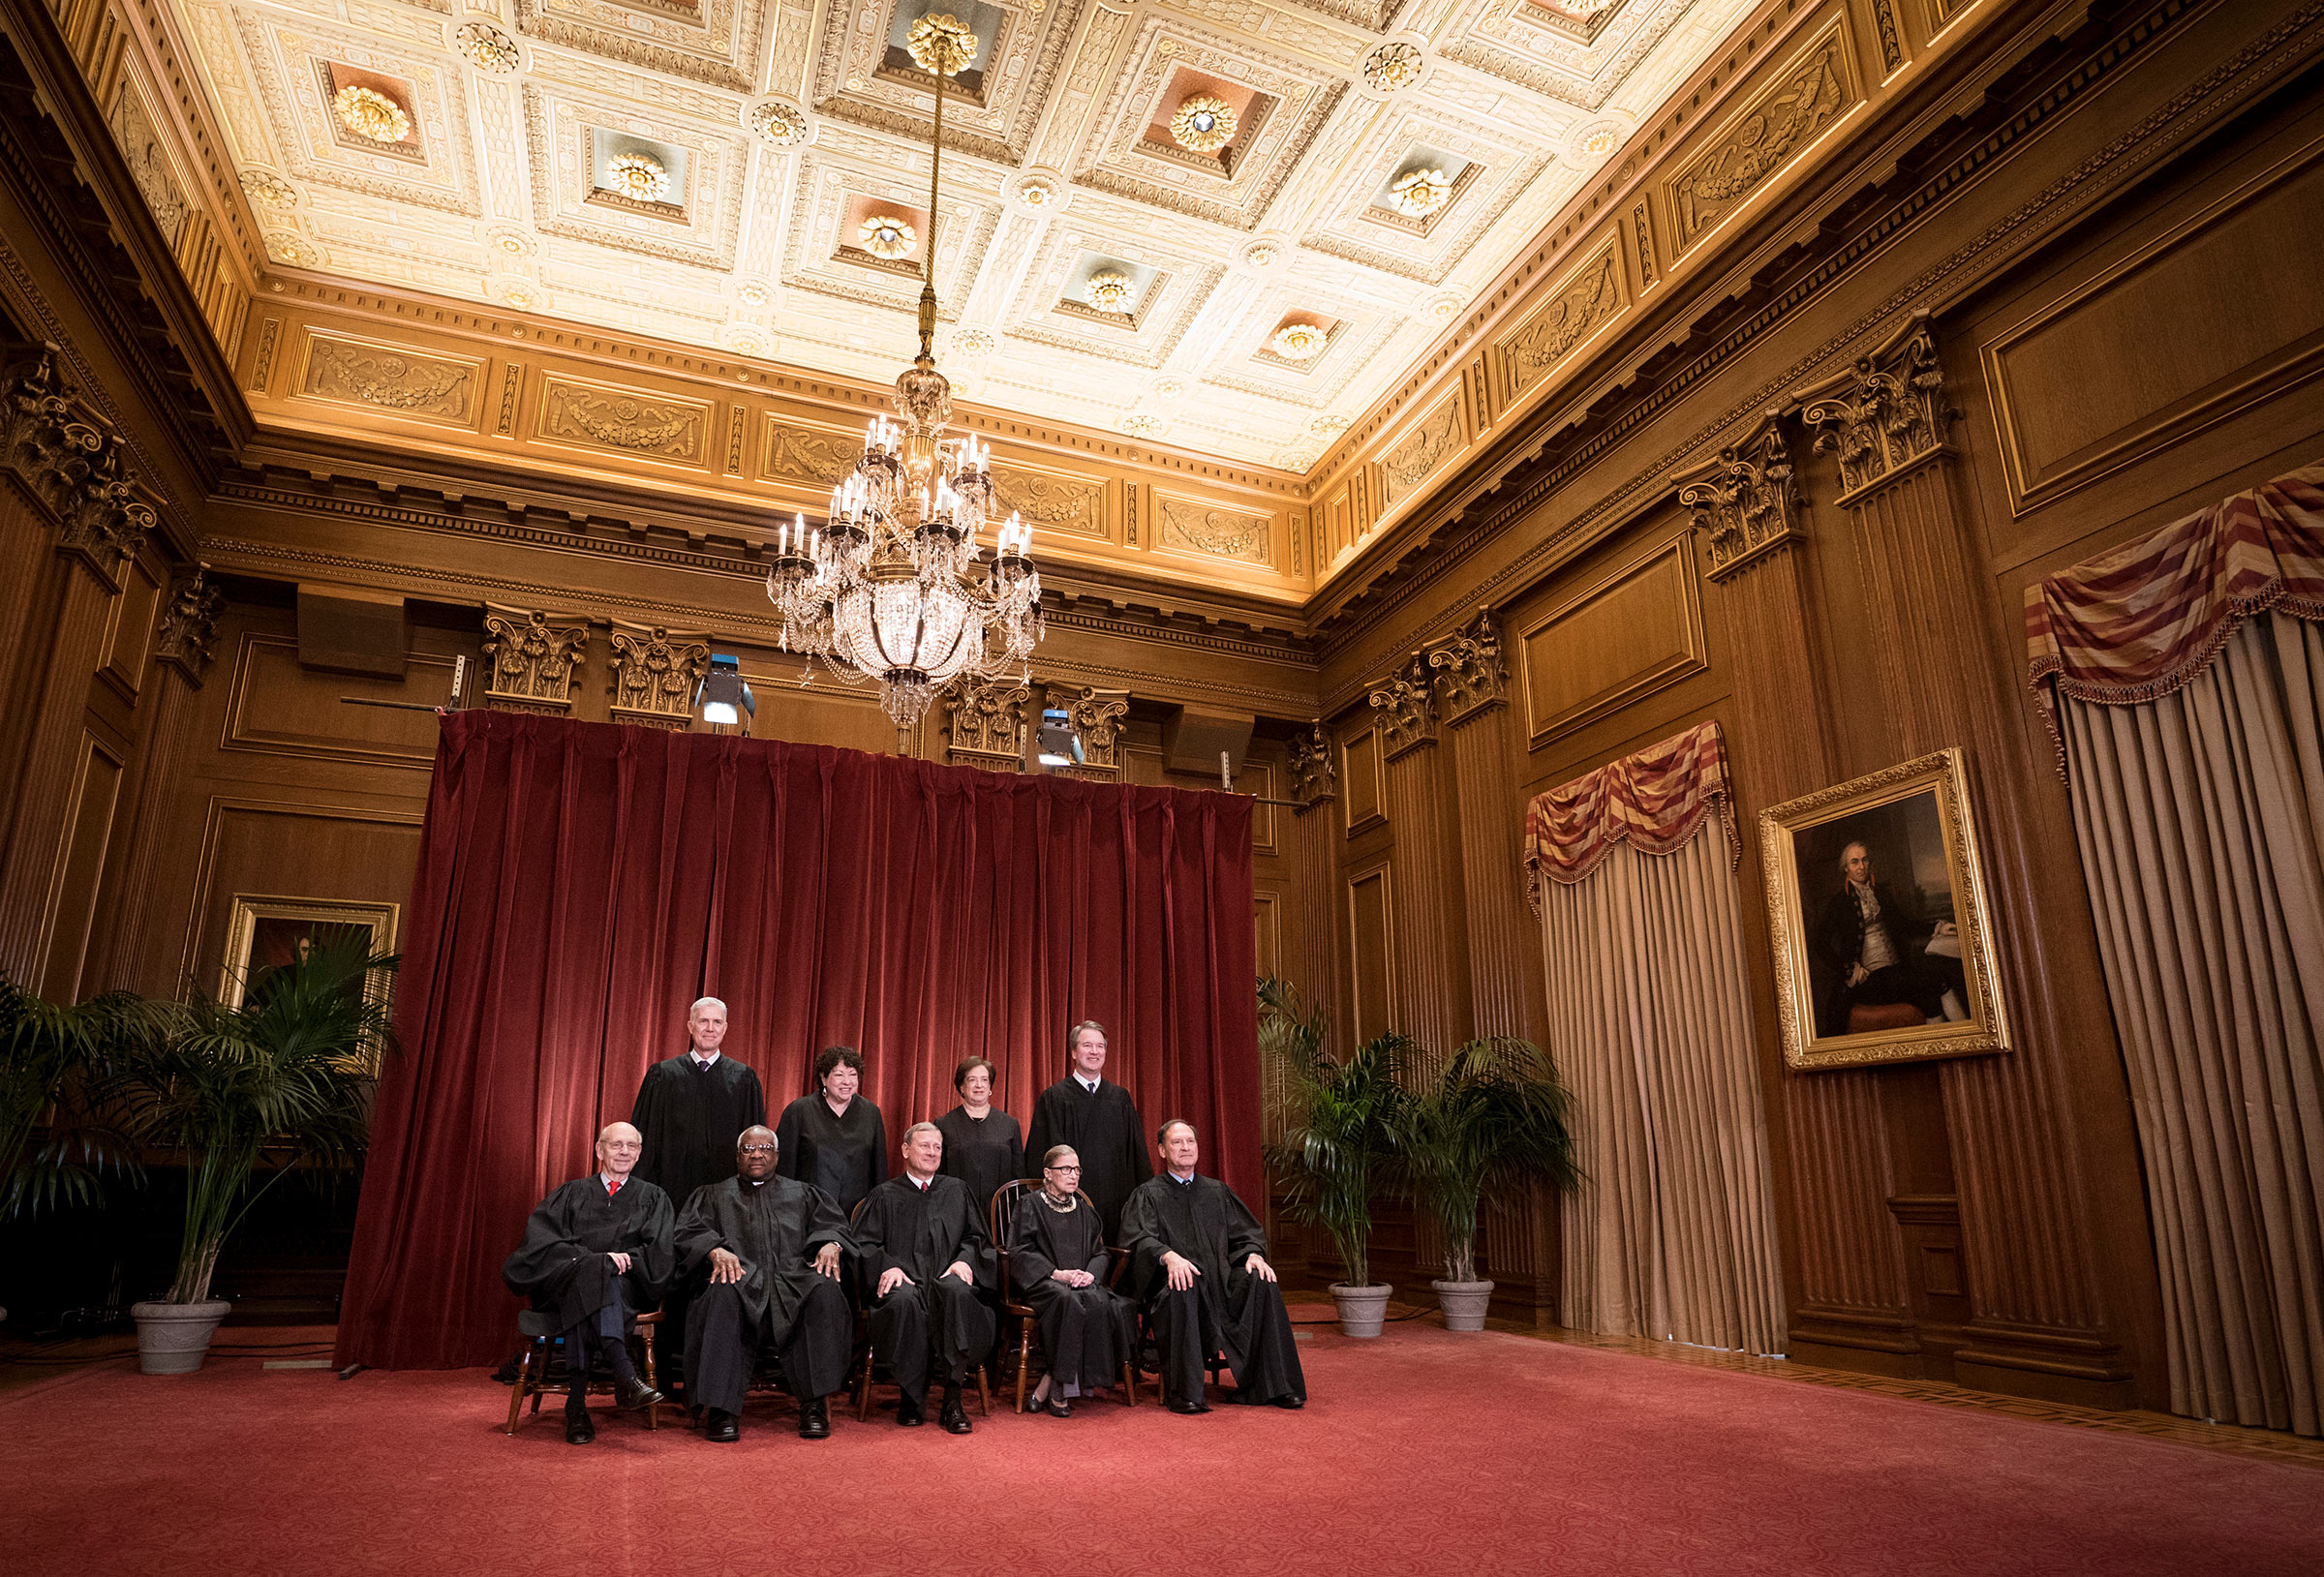 United States Supreme Court (Front L-R) Associate Justice Stephen Breyer, Associate Justice Clarence Thomas, Chief Justice John Roberts, Associate Justice Ruth Bader Ginsburg, Associate Justice Samuel Alito, Jr., (Back L-R) Associate Justice Neil Gorsuch, Associate Justice Sonia Sotomayor, Associate Justice Elena Kagan and Associate Justice Brett Kavanaugh pose for their official portrait at the in the East Conference Room at the Supreme Court building November 30, 2018 in Washington, DC. (Kevin Dietsch—dpa/AP)